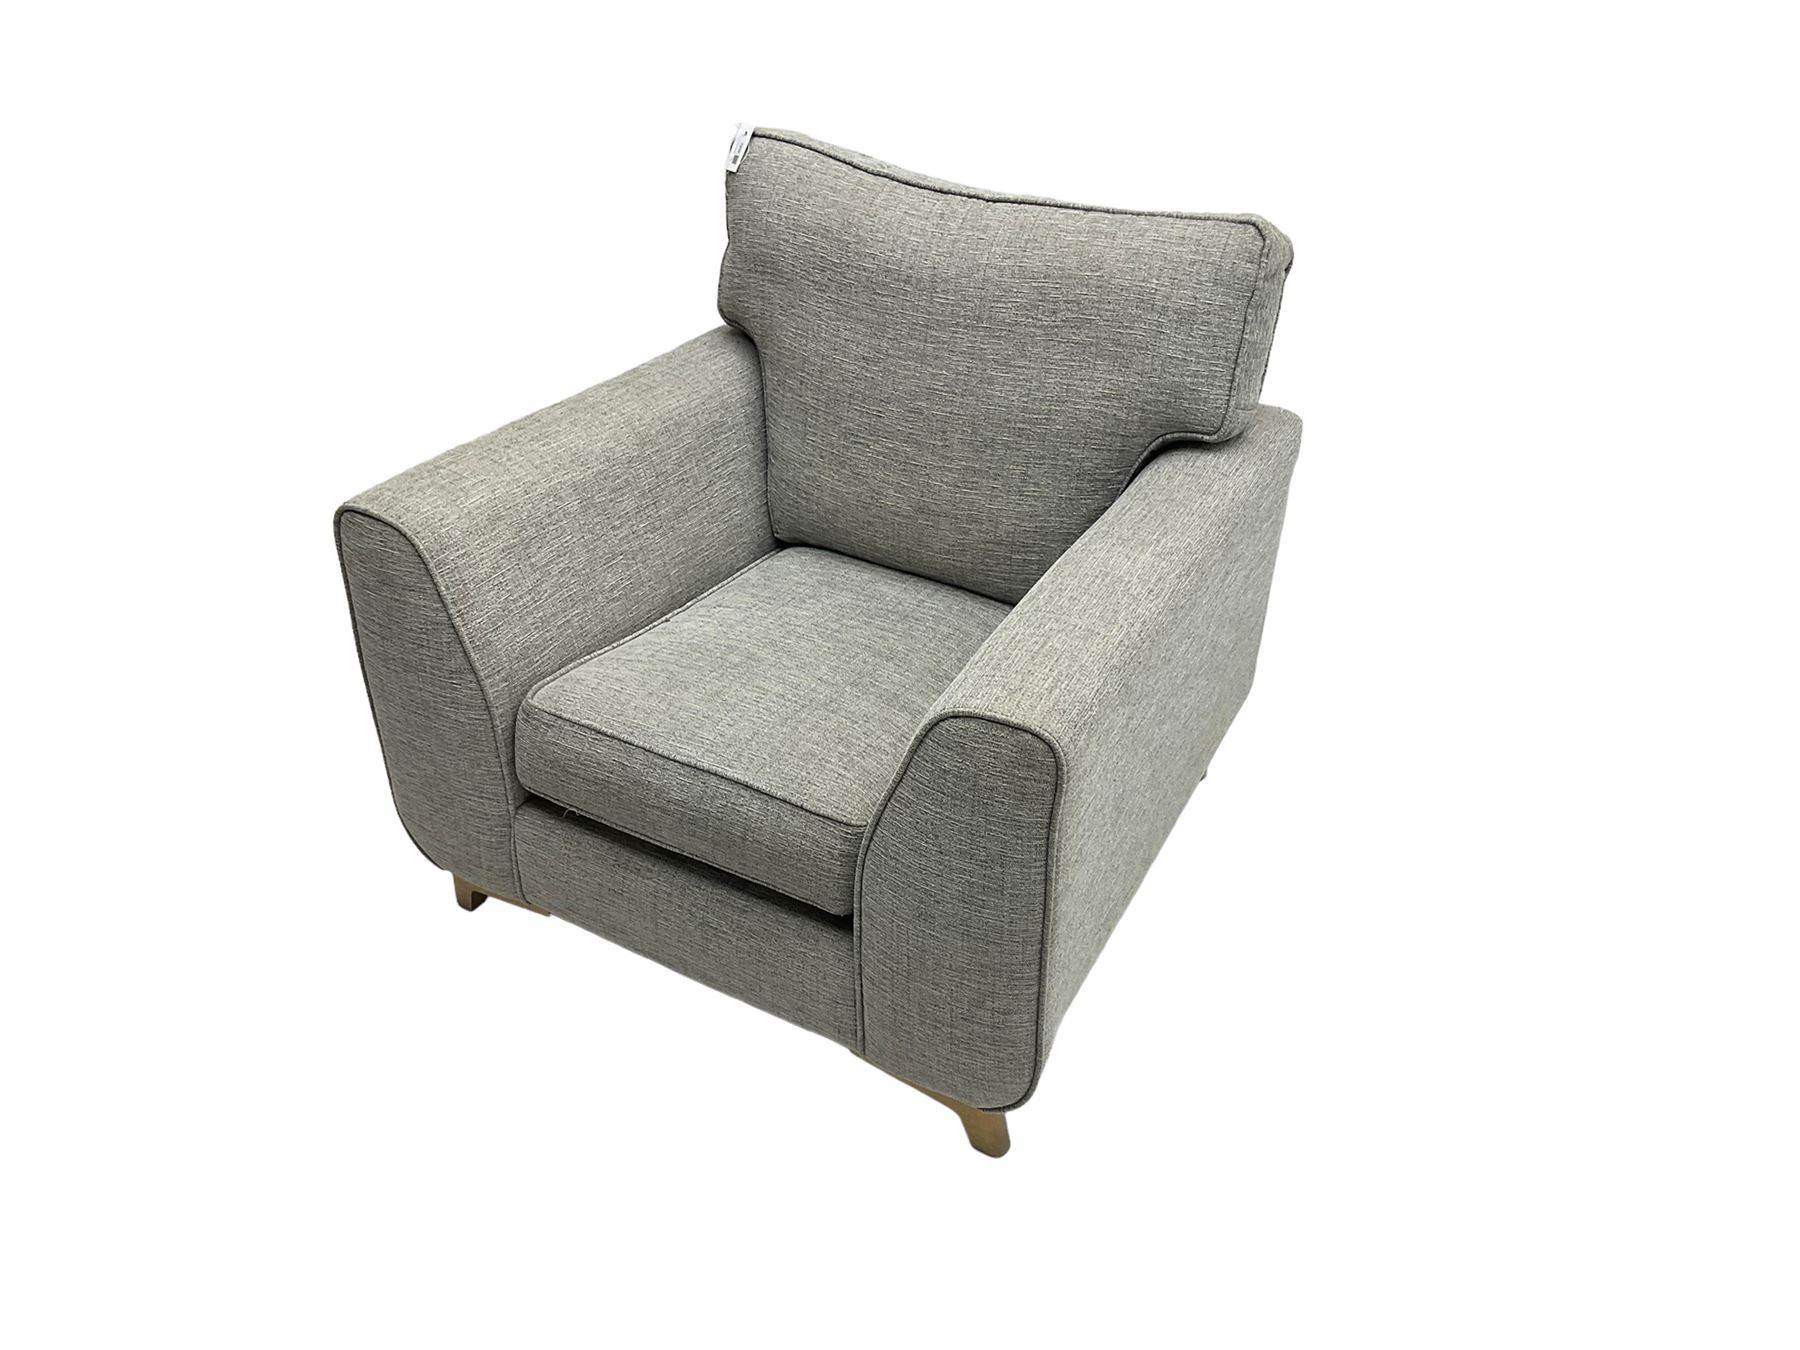 Armchair upholstered in graphite grey fabric - Image 6 of 7